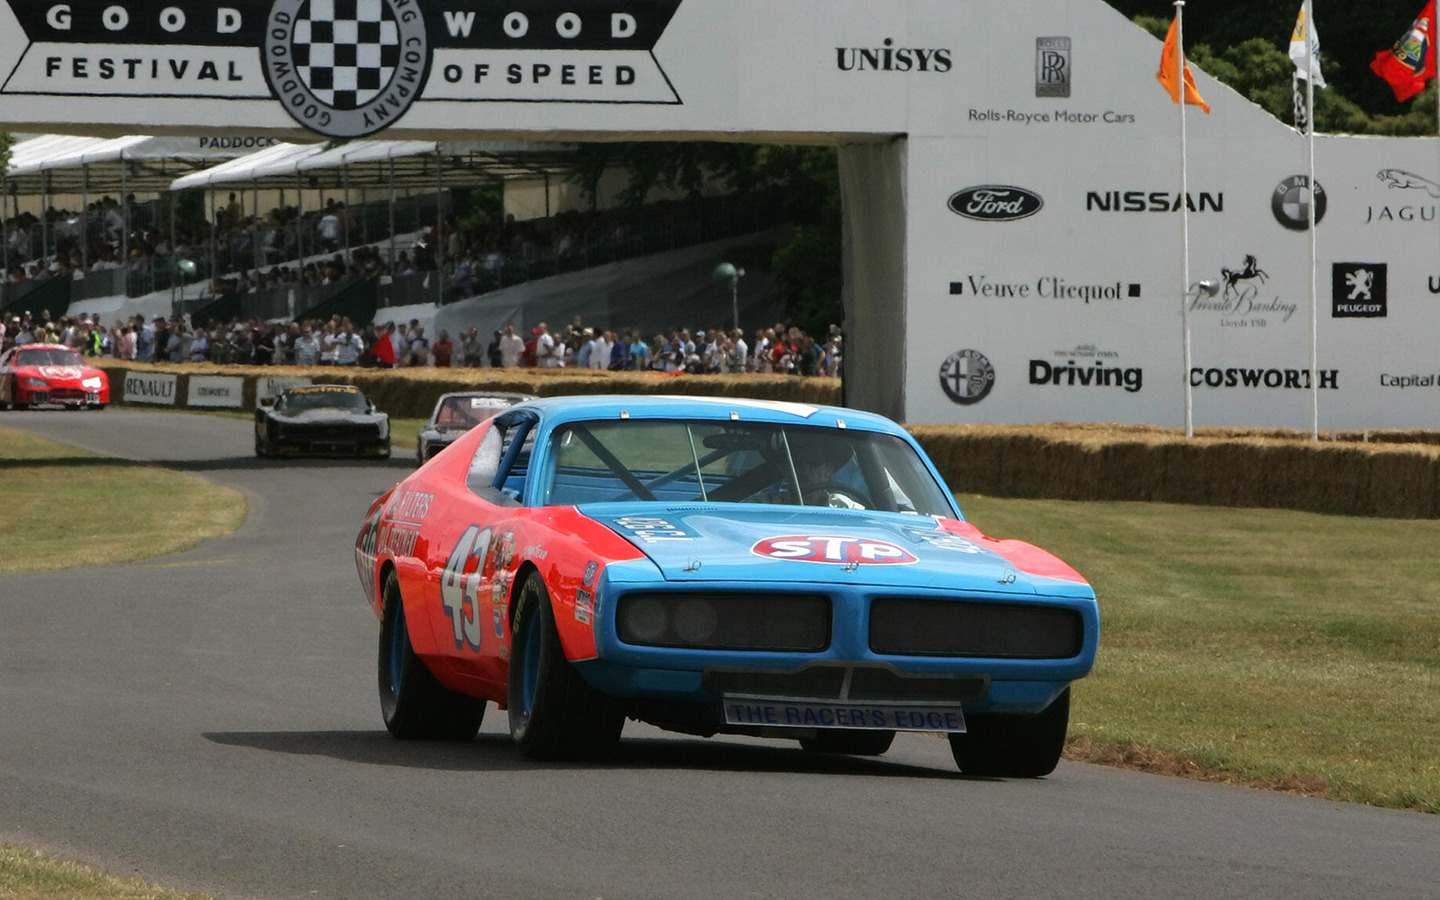 1972 Dodge Charger Nascar Race Car Front Angle 1920×1440